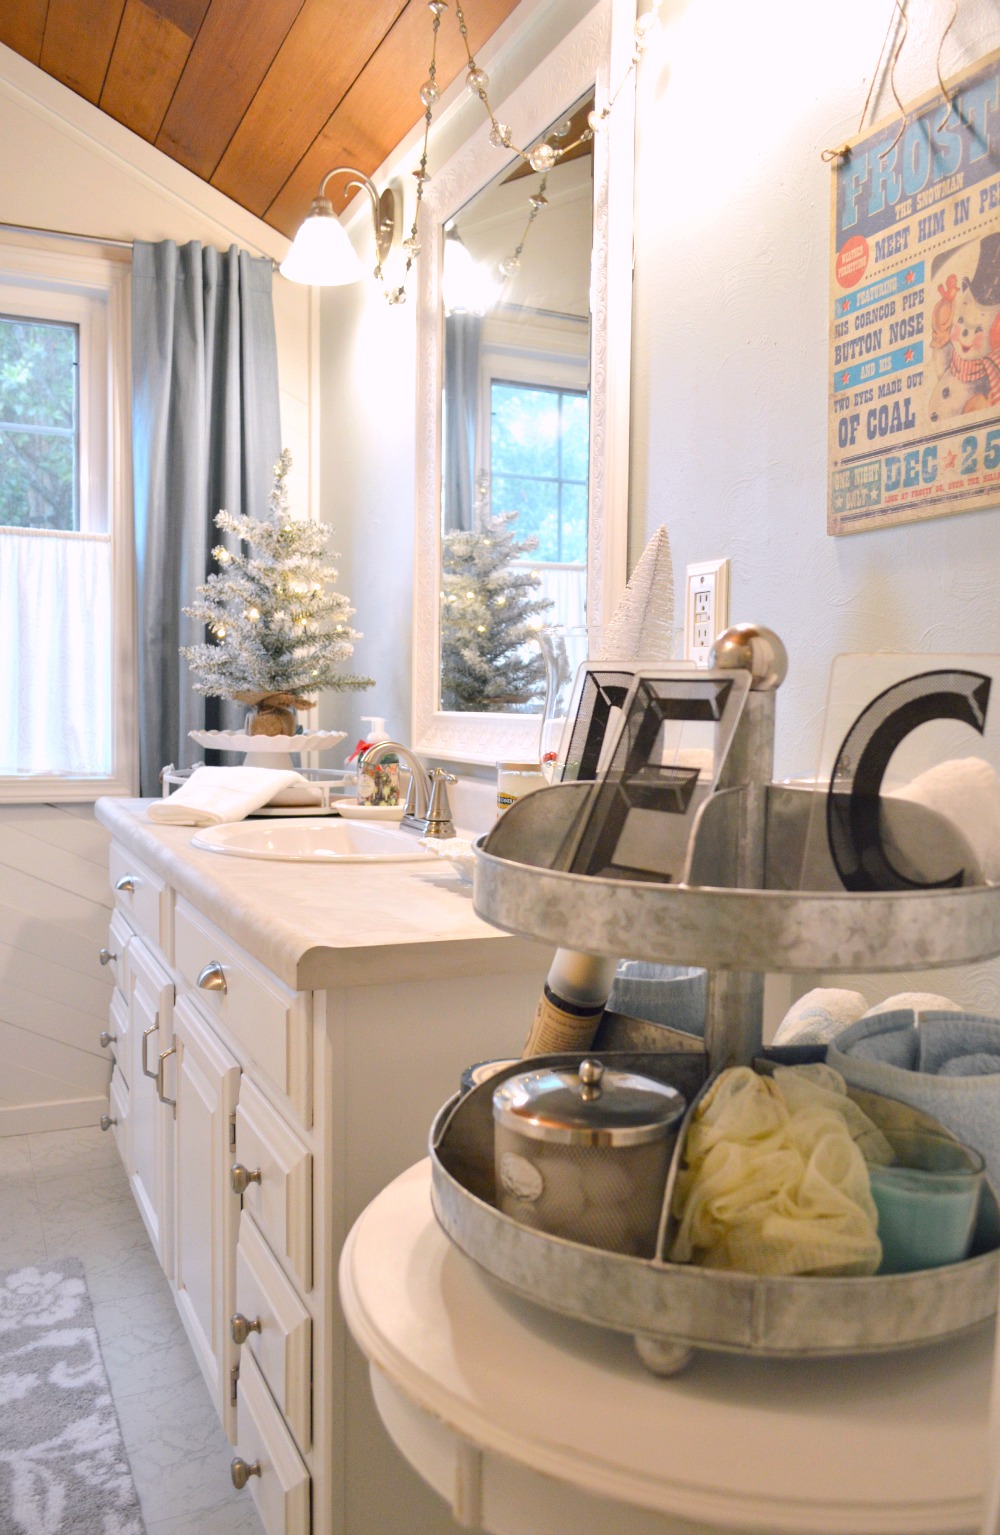 Cottage Christmas Bathroom in Aqua and White - Eclectic Coastal Vintage Home Decorating www.foxhollowcottage.com